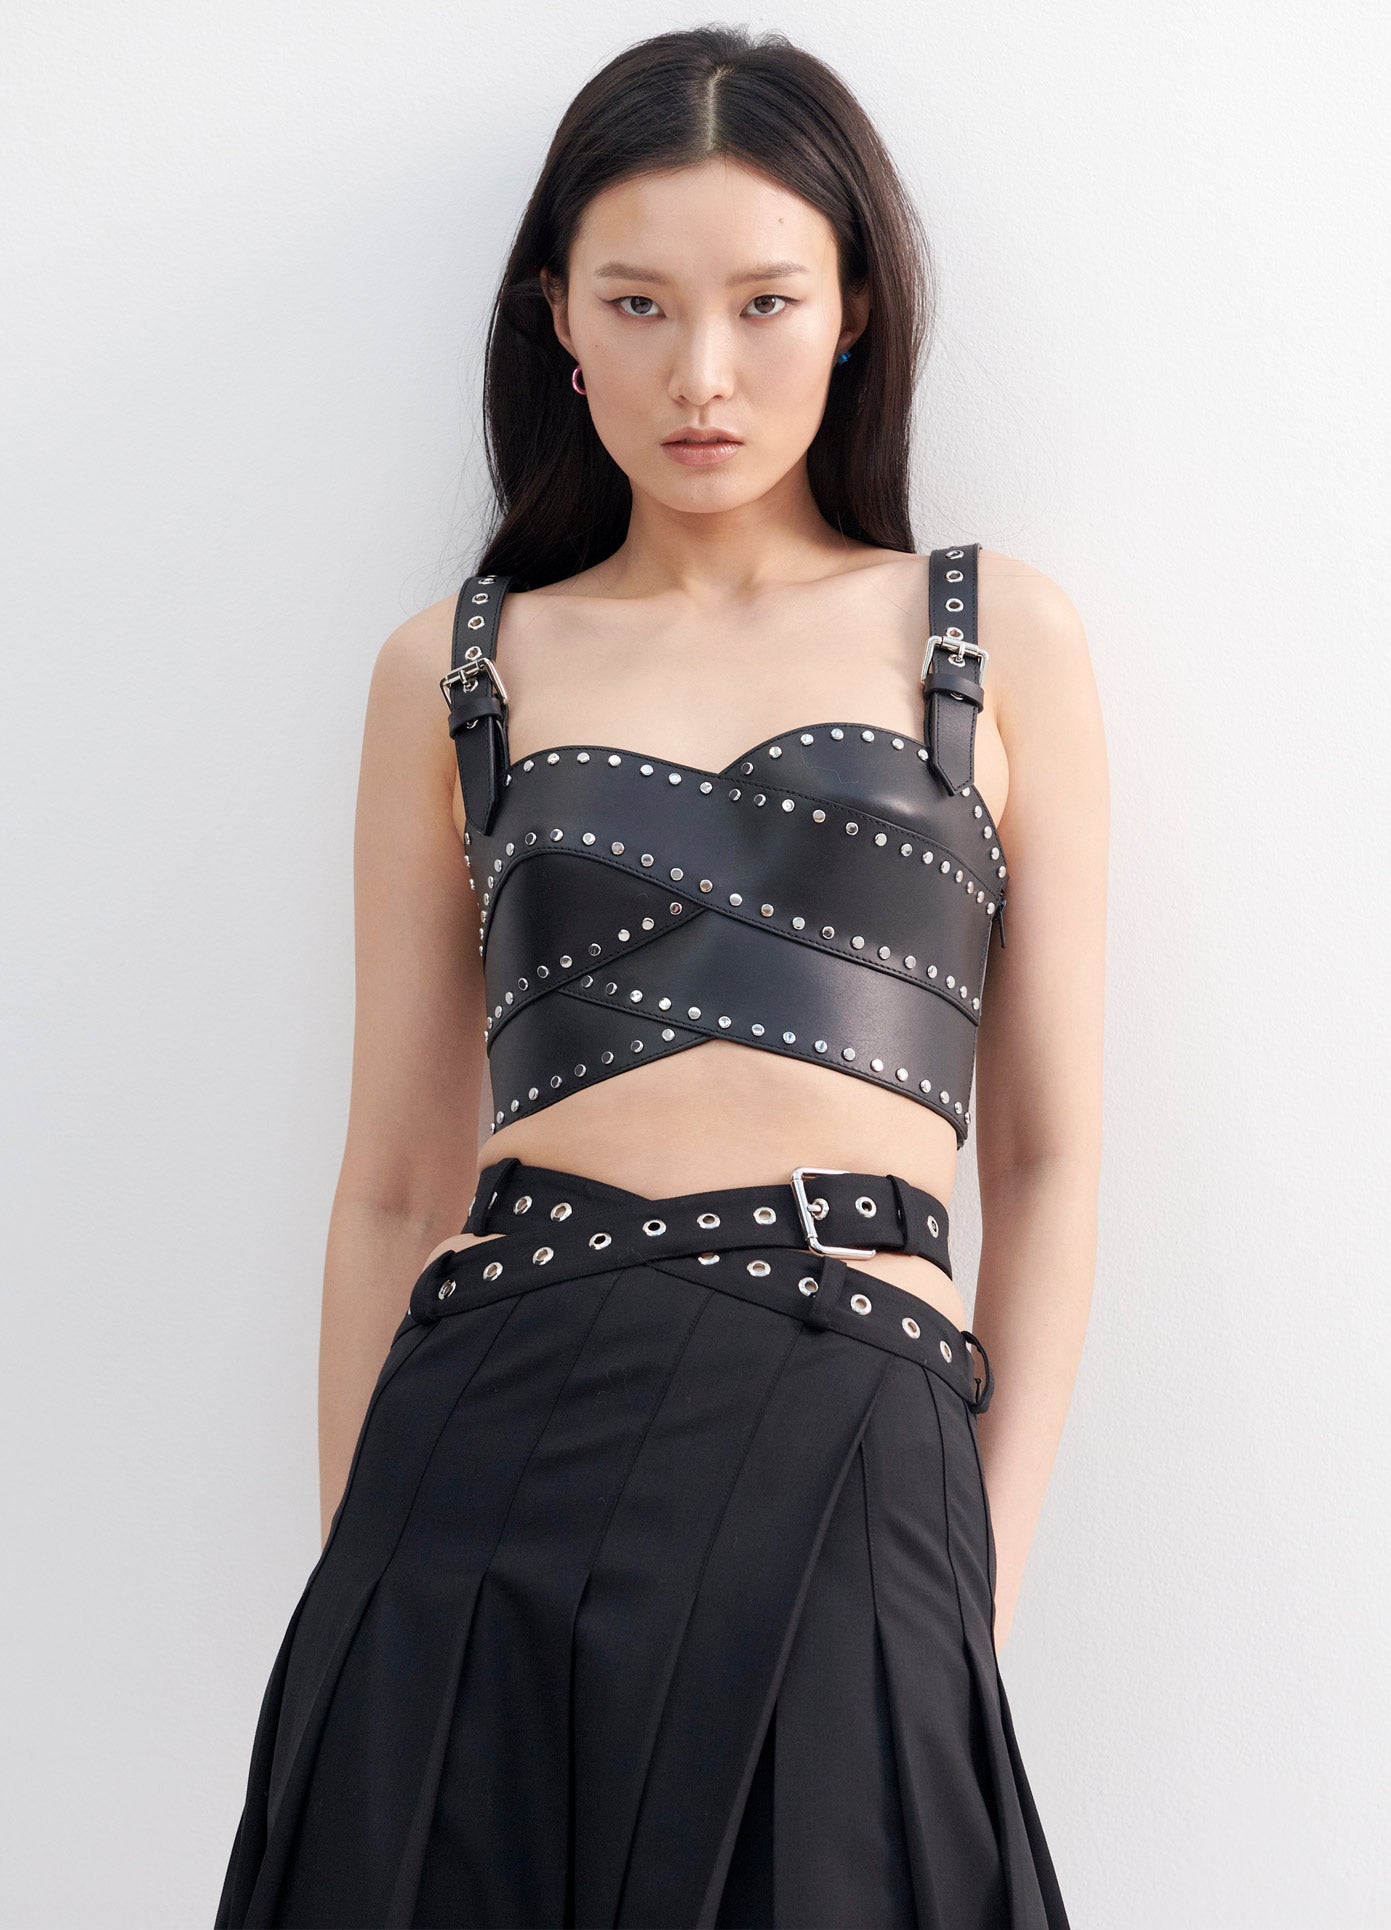 MONSE Studded Bustier in Black on Model Front Detail View